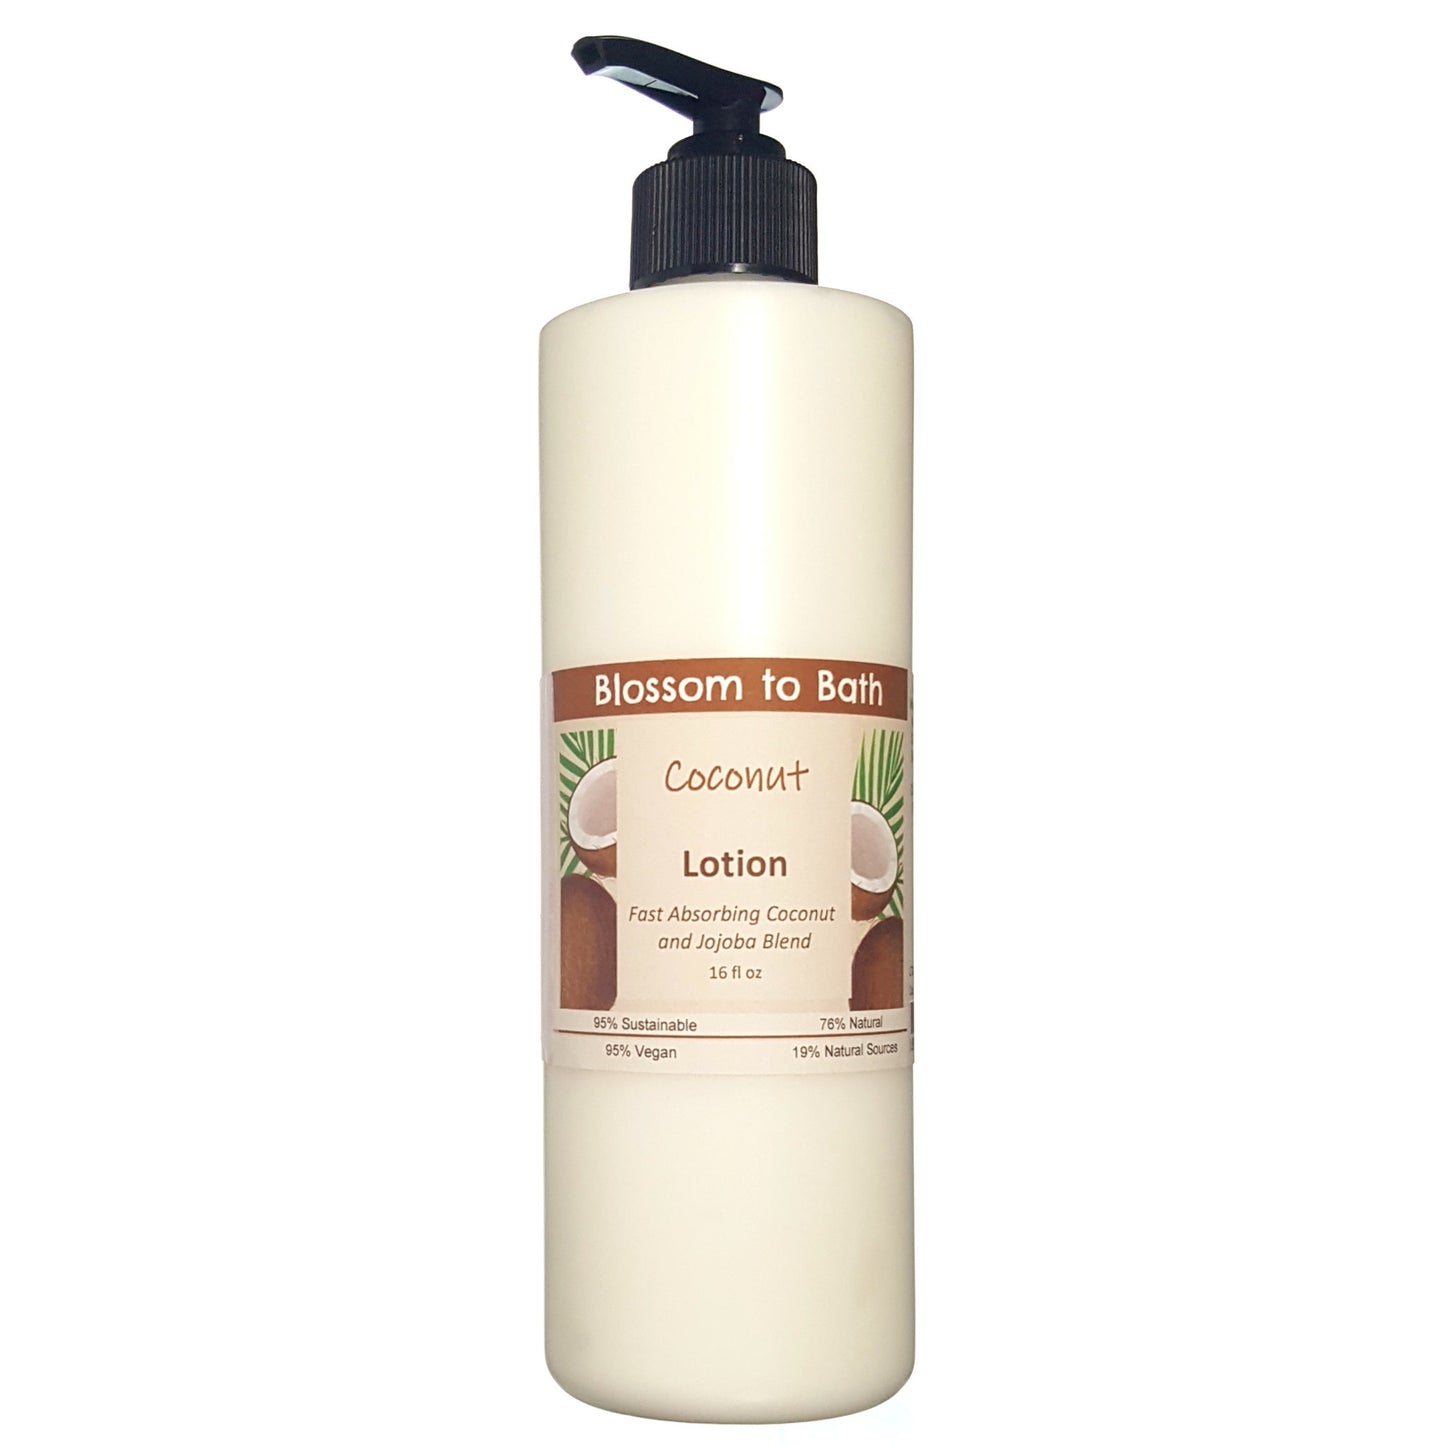 Buy Blossom to Bath Coconut Lotion from Flowersong Soap Studio.  Daily moisture luxury that soaks in quickly made with organic oils and butters that soften and smooth the skin  Bold coconut swirled with tropical fruit.